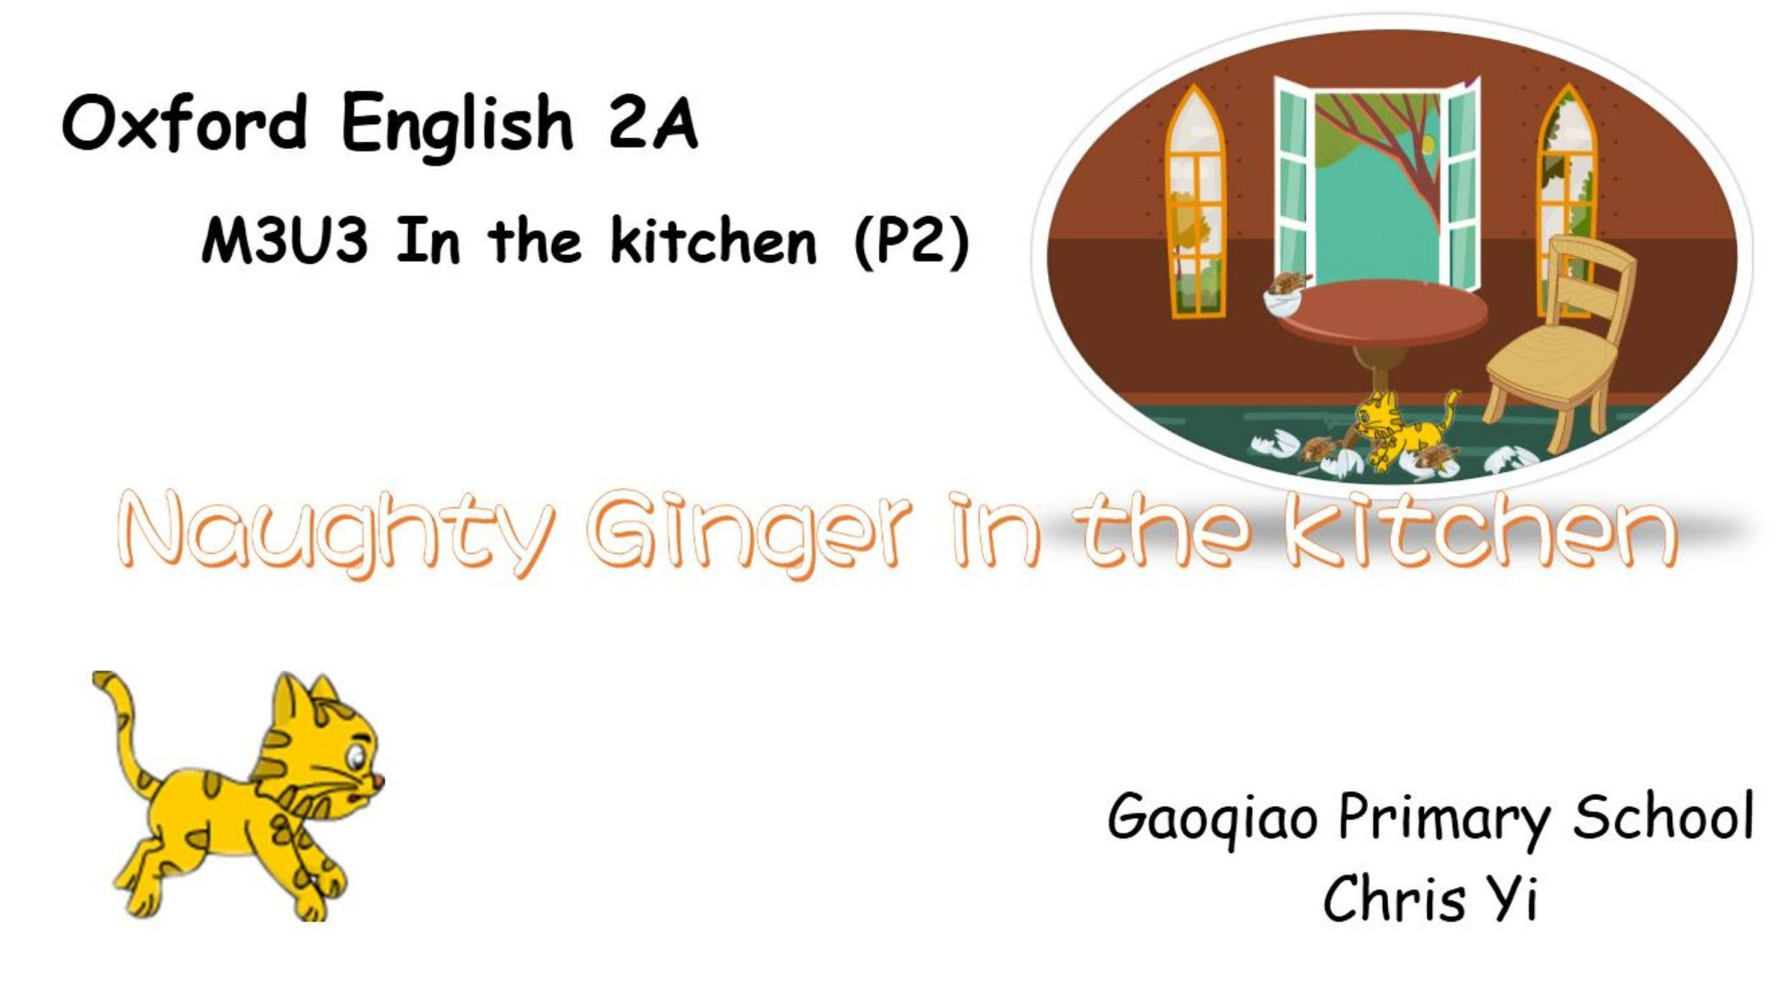 Naughty Ginger in the kitchen